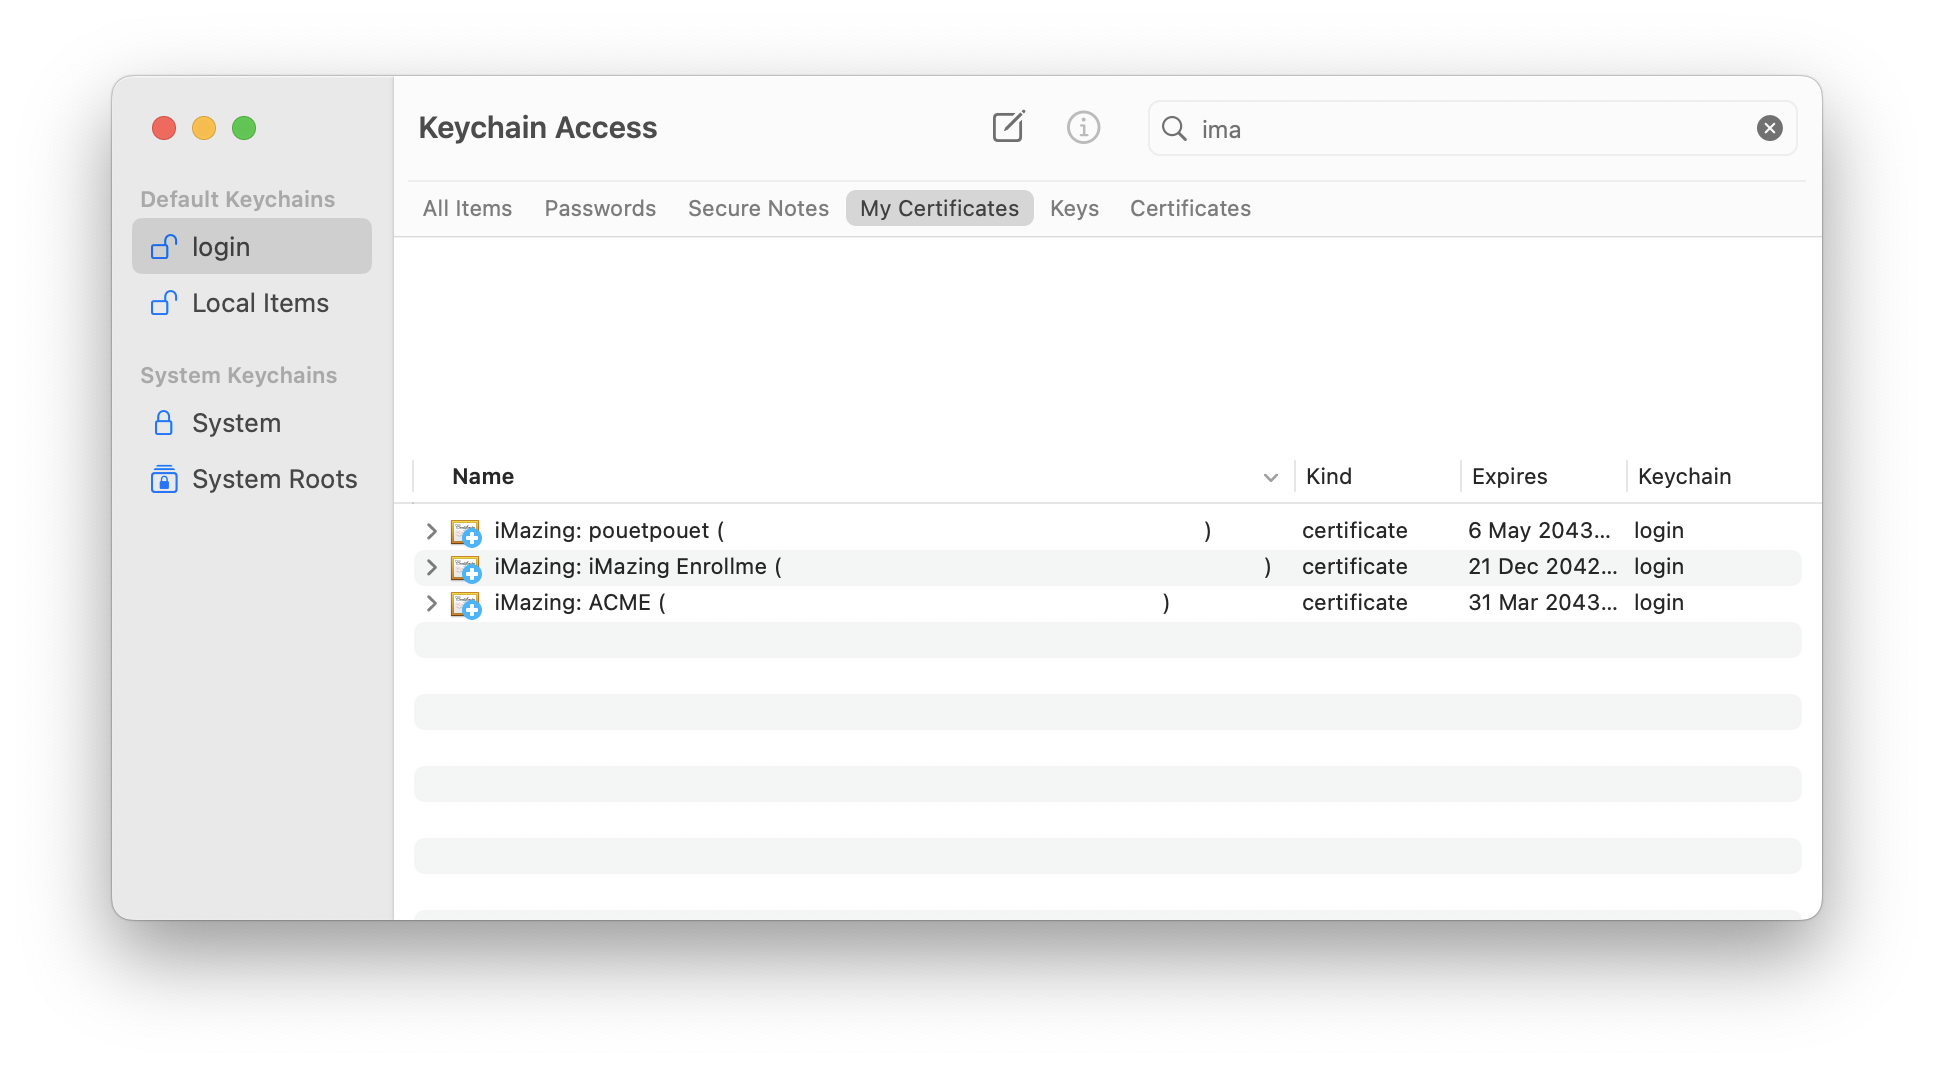 iMazing Supervision Certificates in macOS Keychain